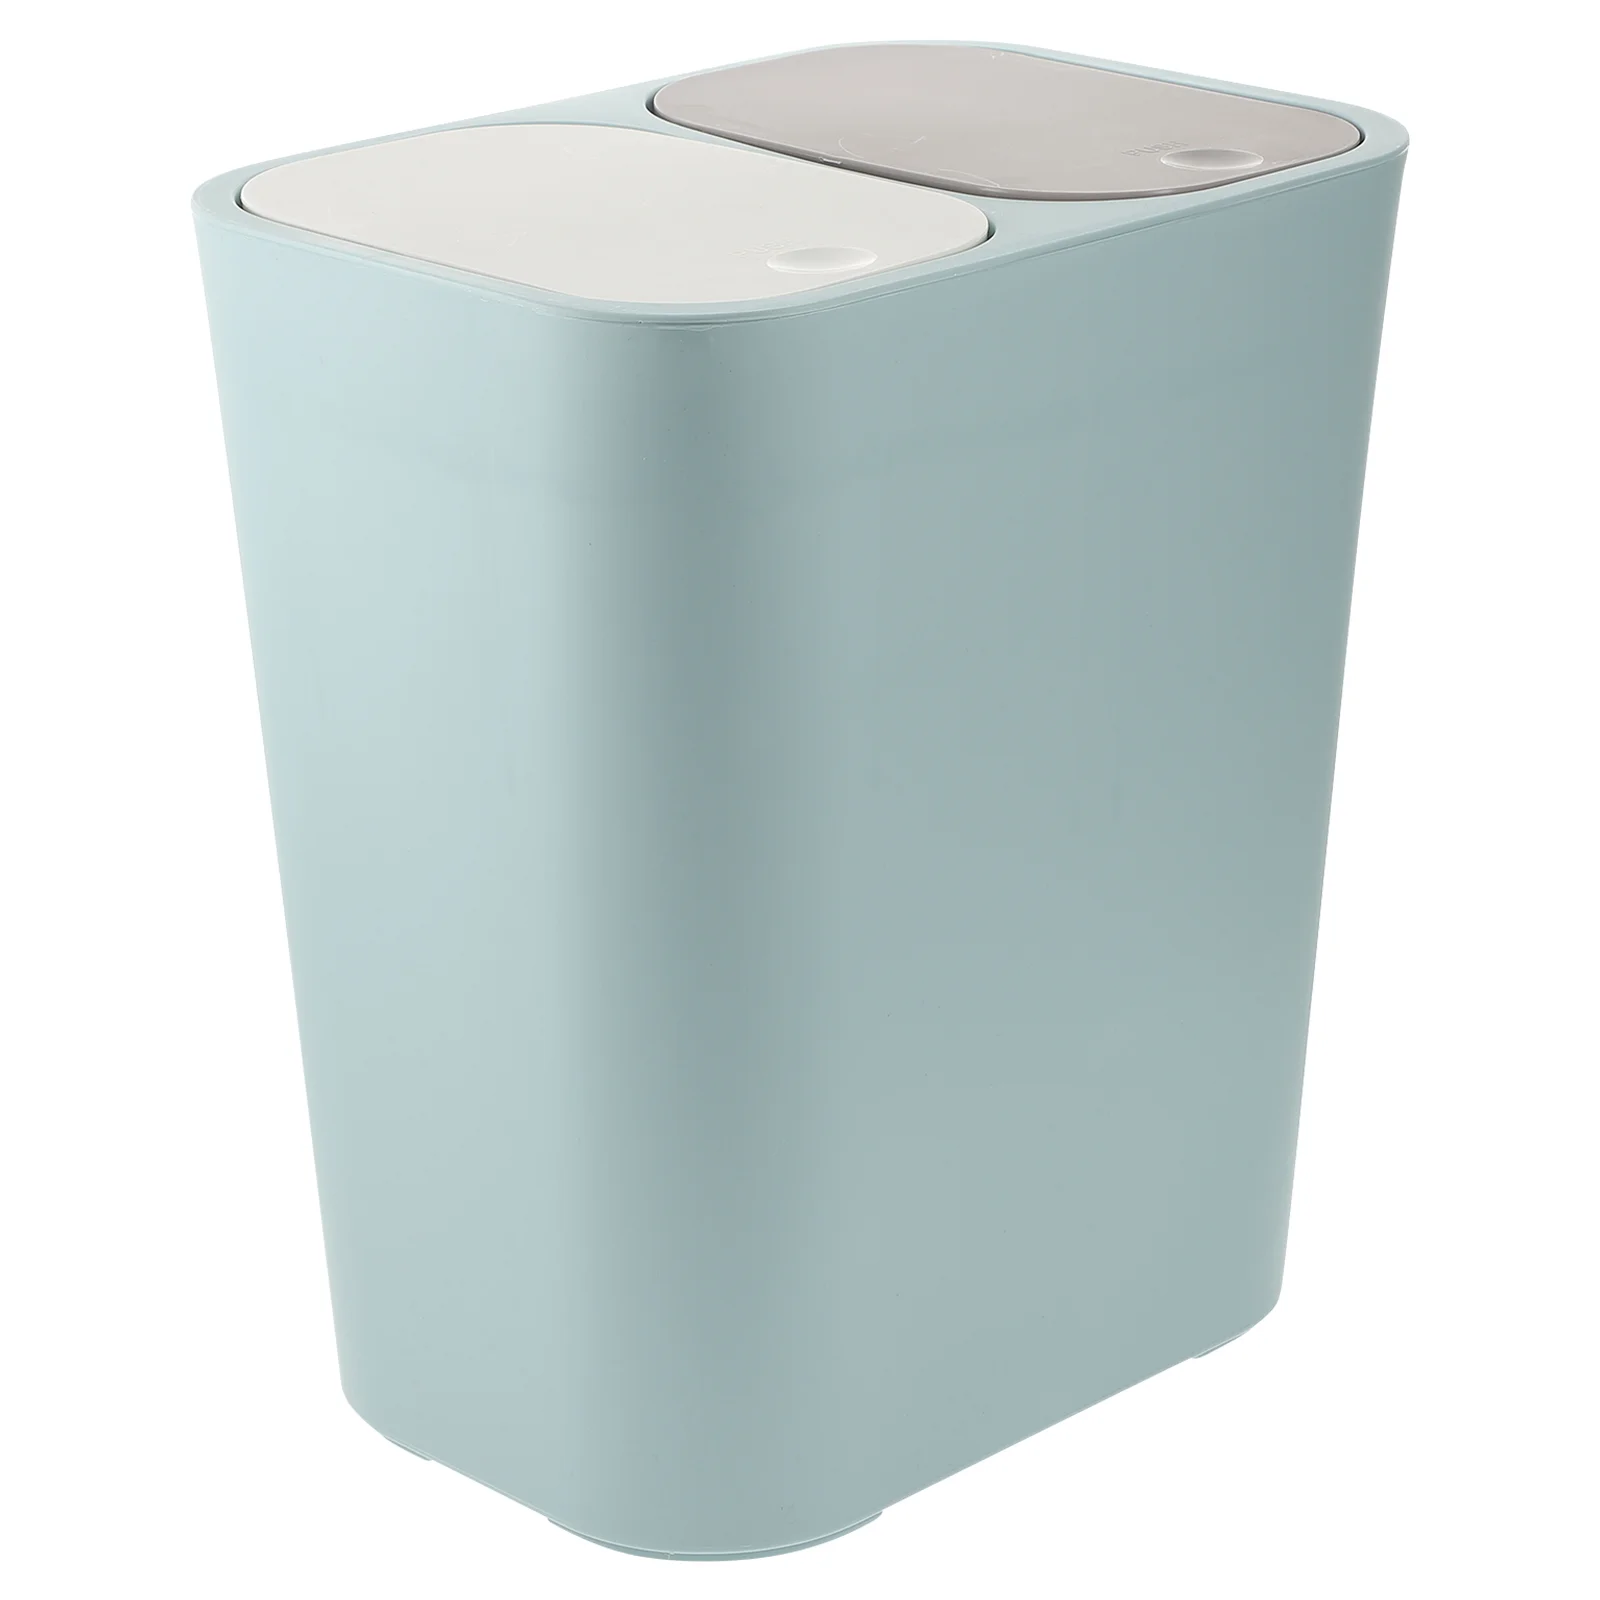 

Dual Trash Can Lid Dual Compartment Garbage Can Classified Recycling Bin Rectangular Trash Containers Waste Bin Kitchen